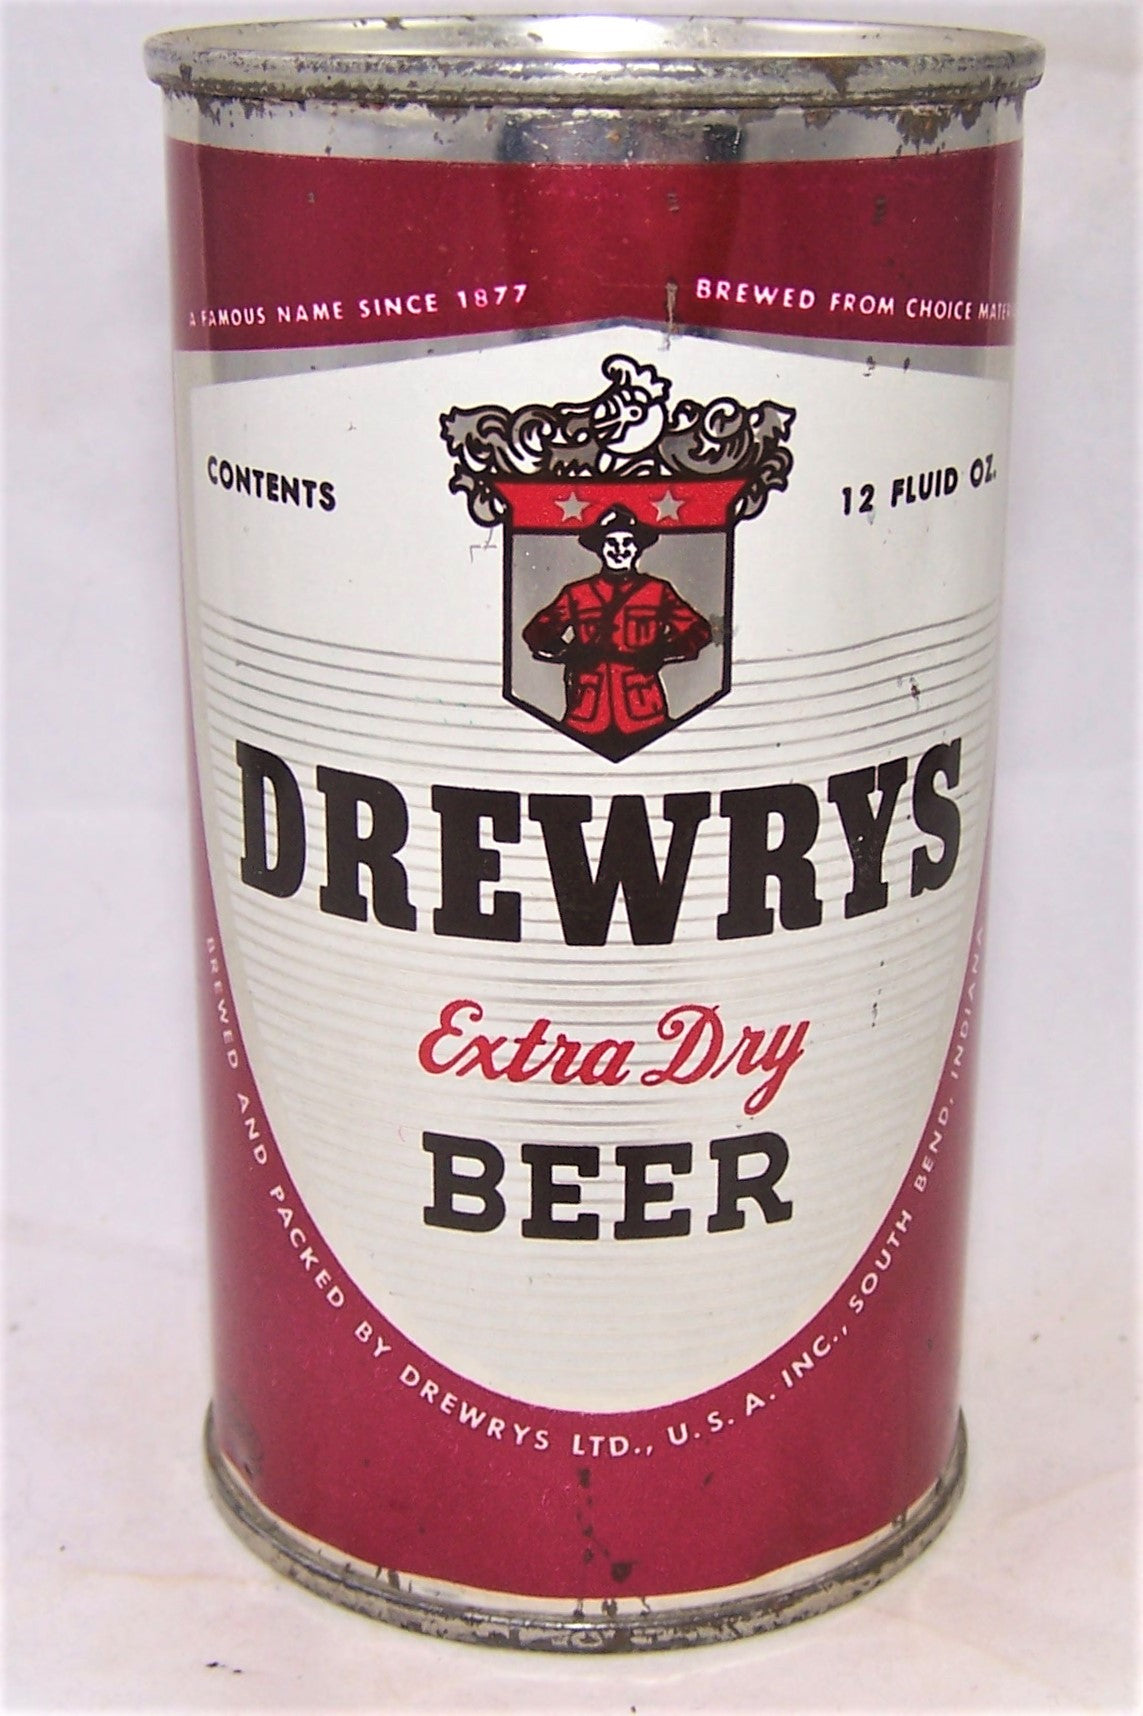 Drewrys Extra Dry (Your Character) USBC 56-38, Grade 1  Sold on 07/10/19